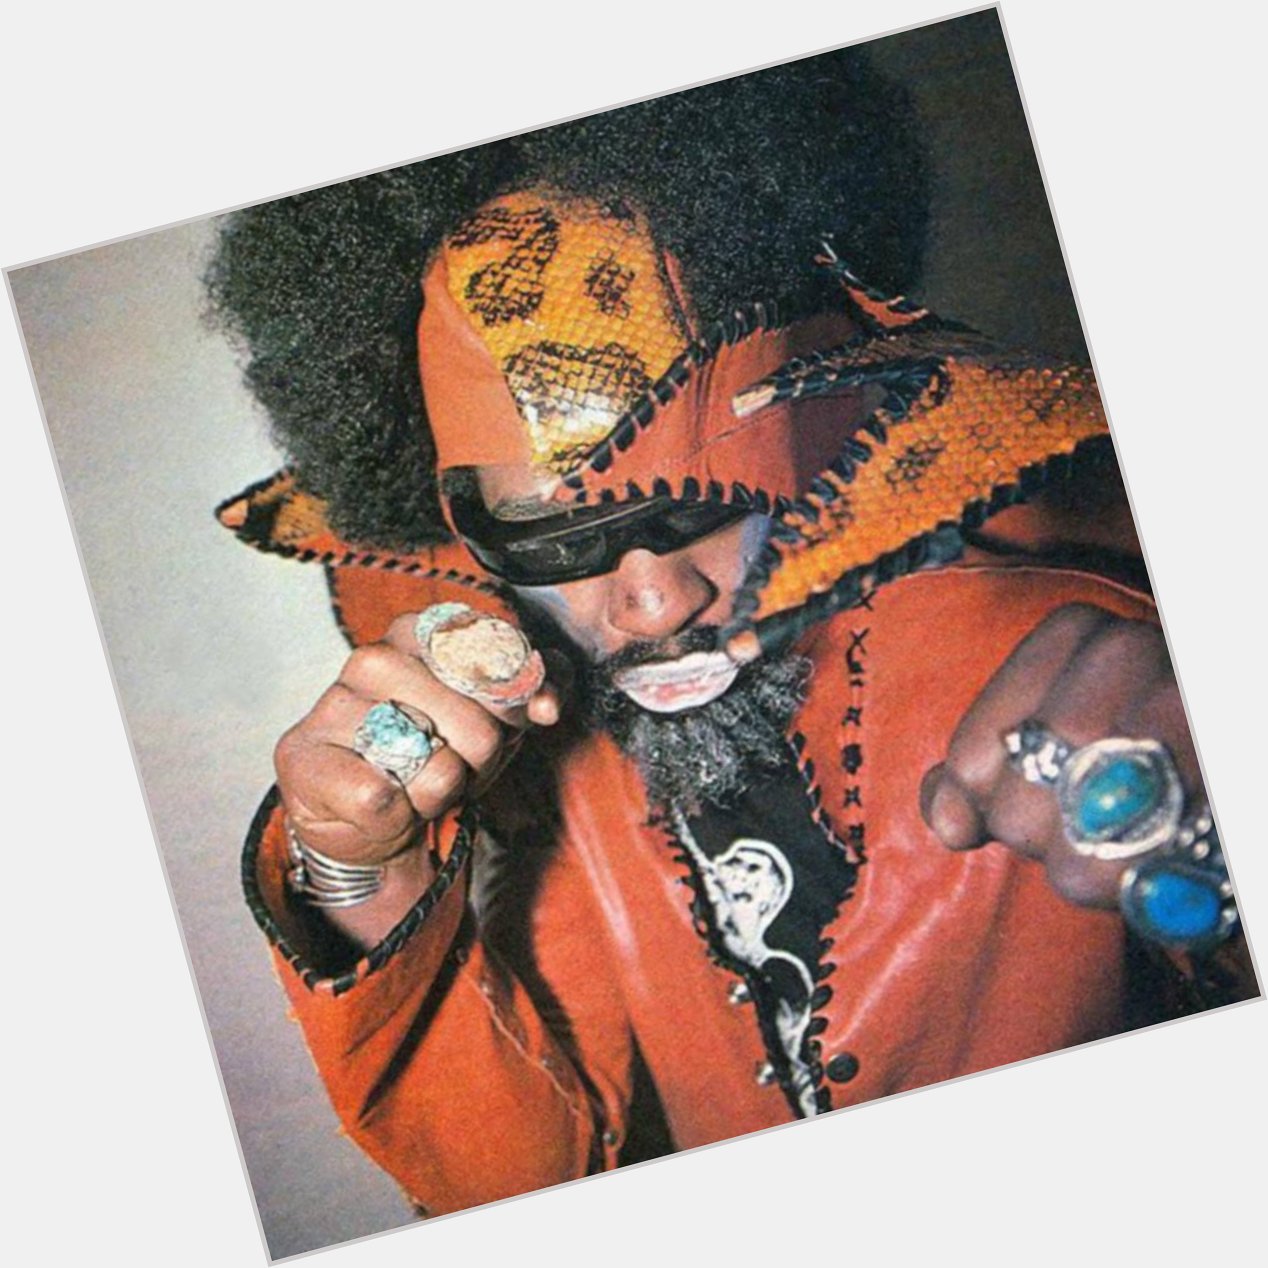 Happy Birthday to the father of Funkadelic/Parliament! George Clinton 